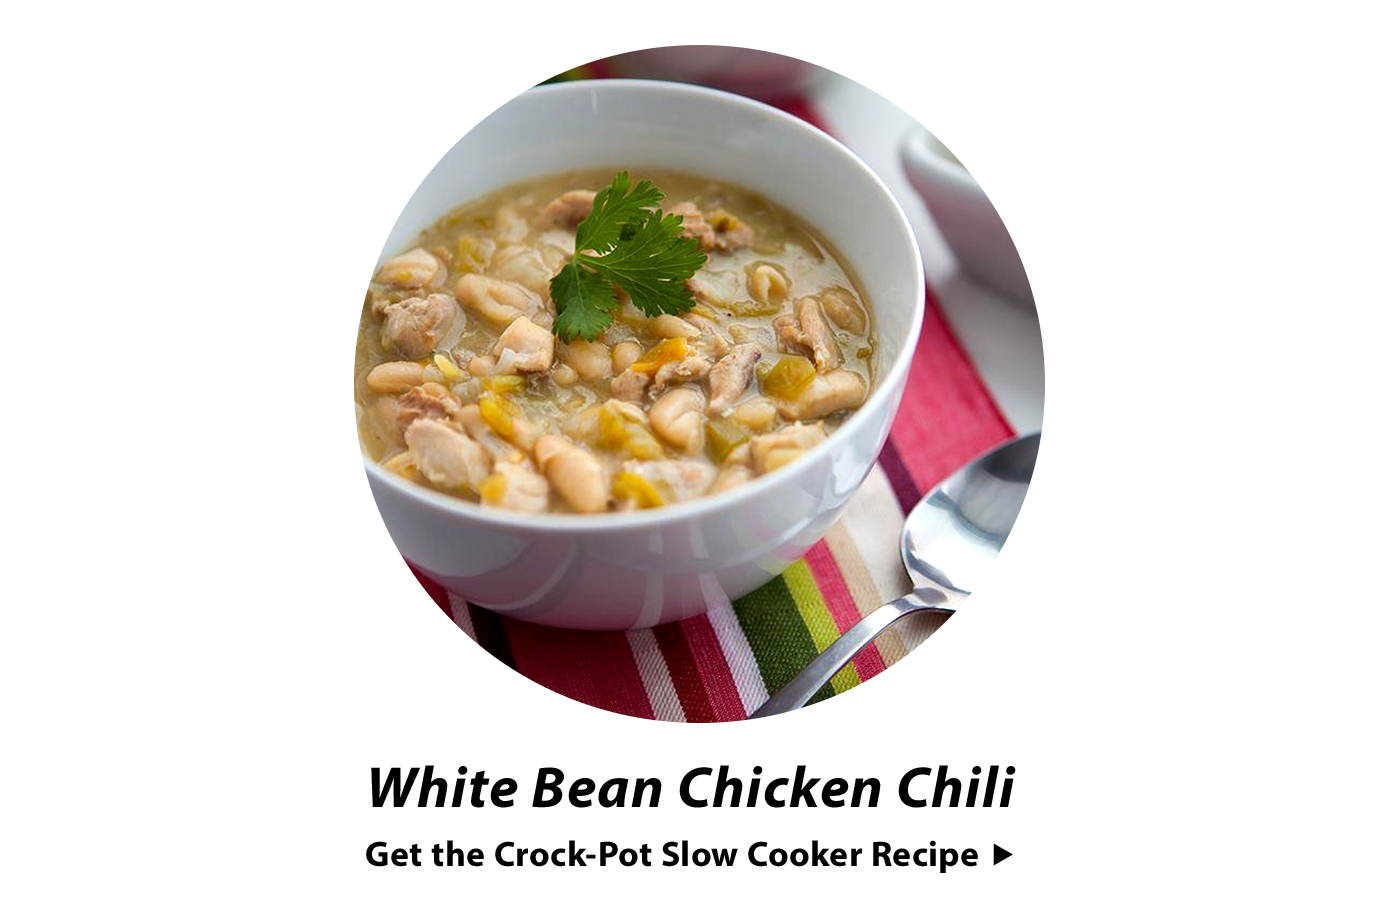 White Bean Chicken Chili. Get the Crock-Pot Slow Cooker Recipe